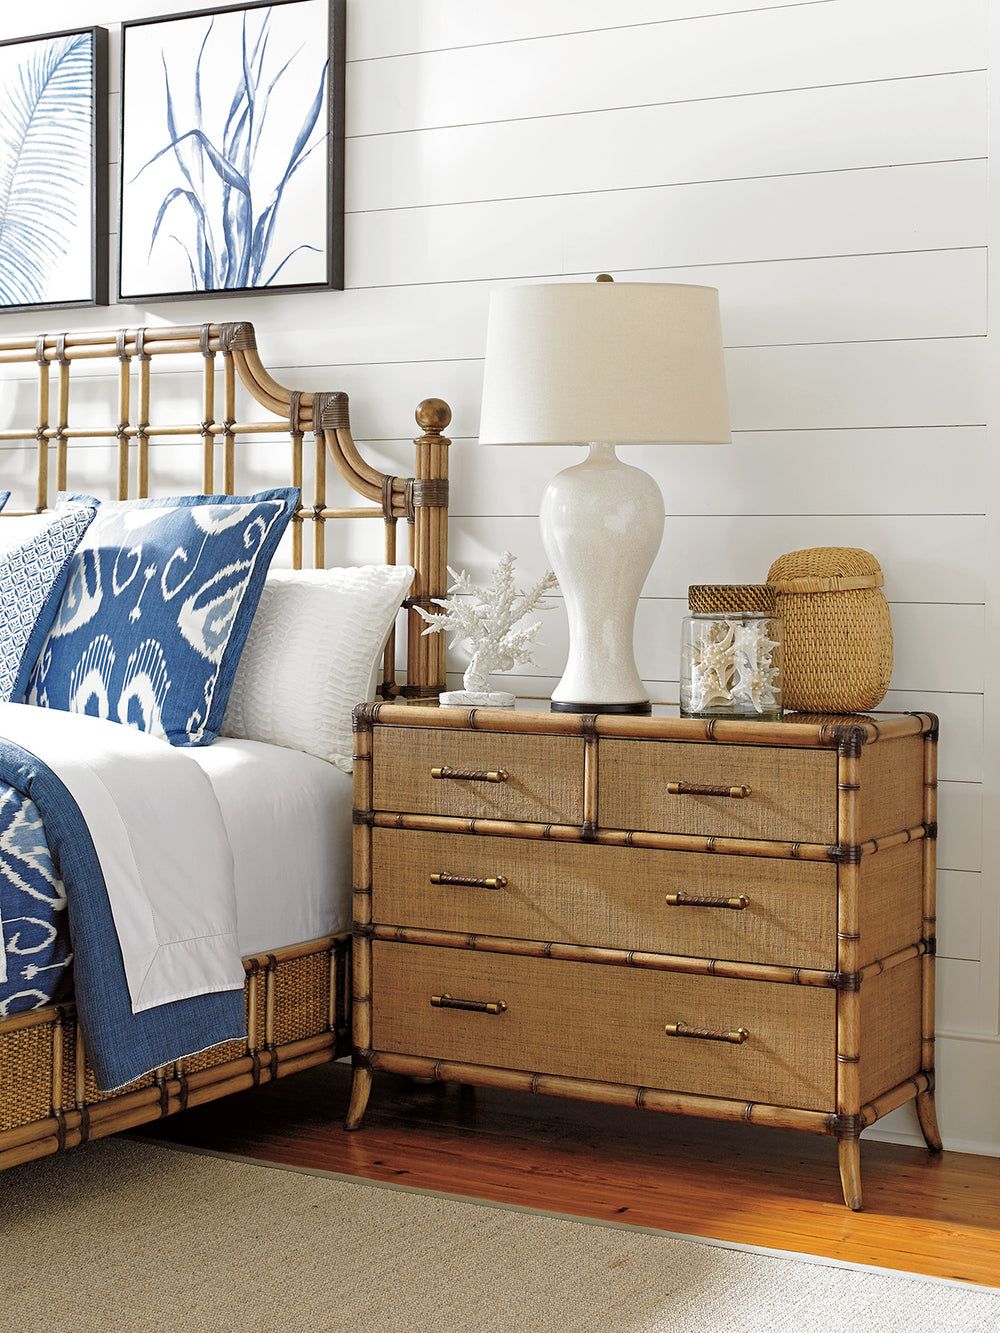 American Home Furniture | Tommy Bahama Home  - Twin Palms Bermuda Sands Chest